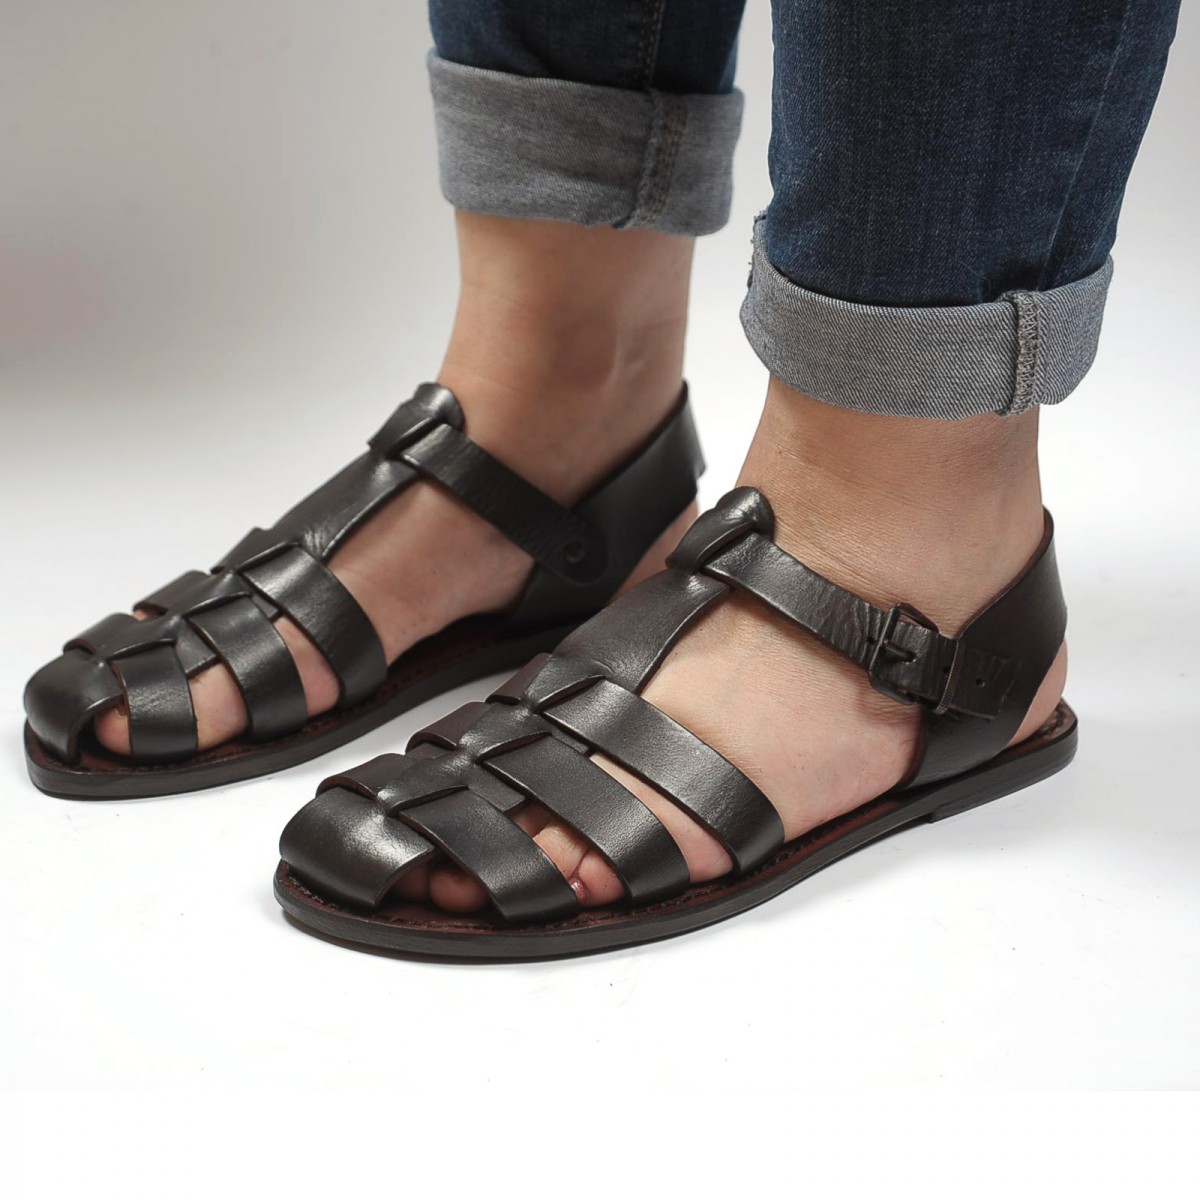 Dark brown flat sandals for women real leather Handmade in Italy ...